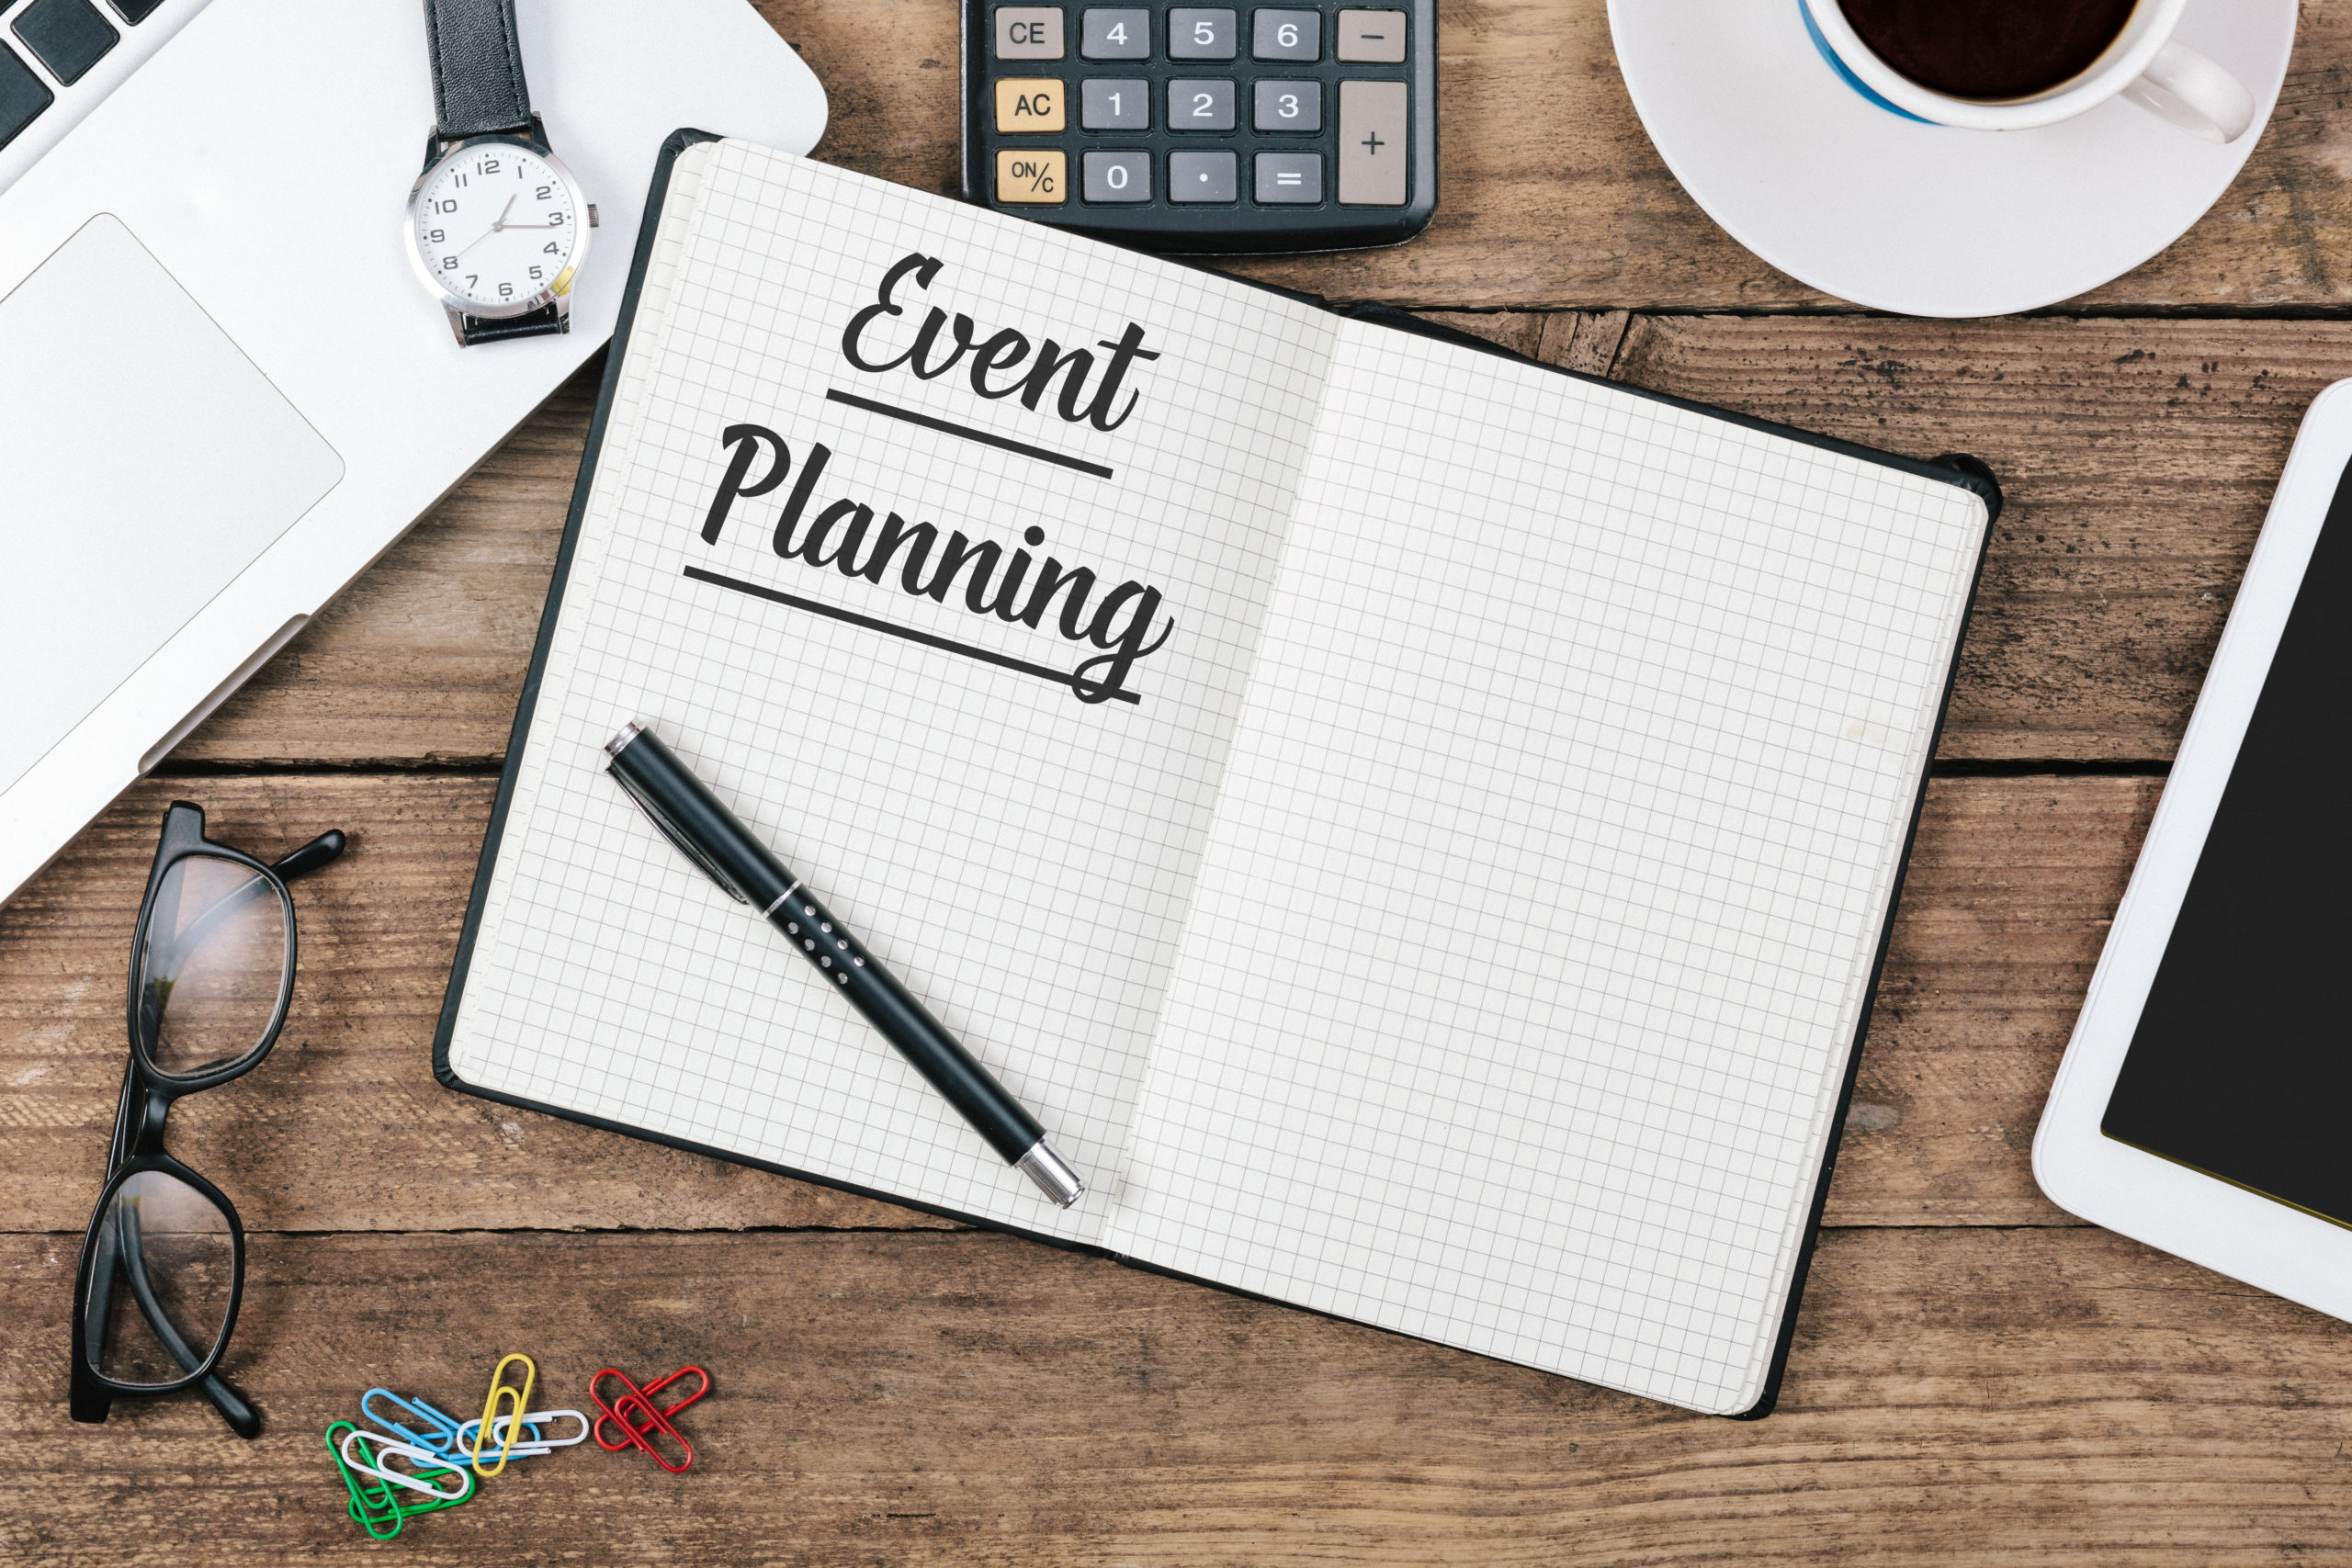 An event planning notebook is on a desk, opened, with a pen.